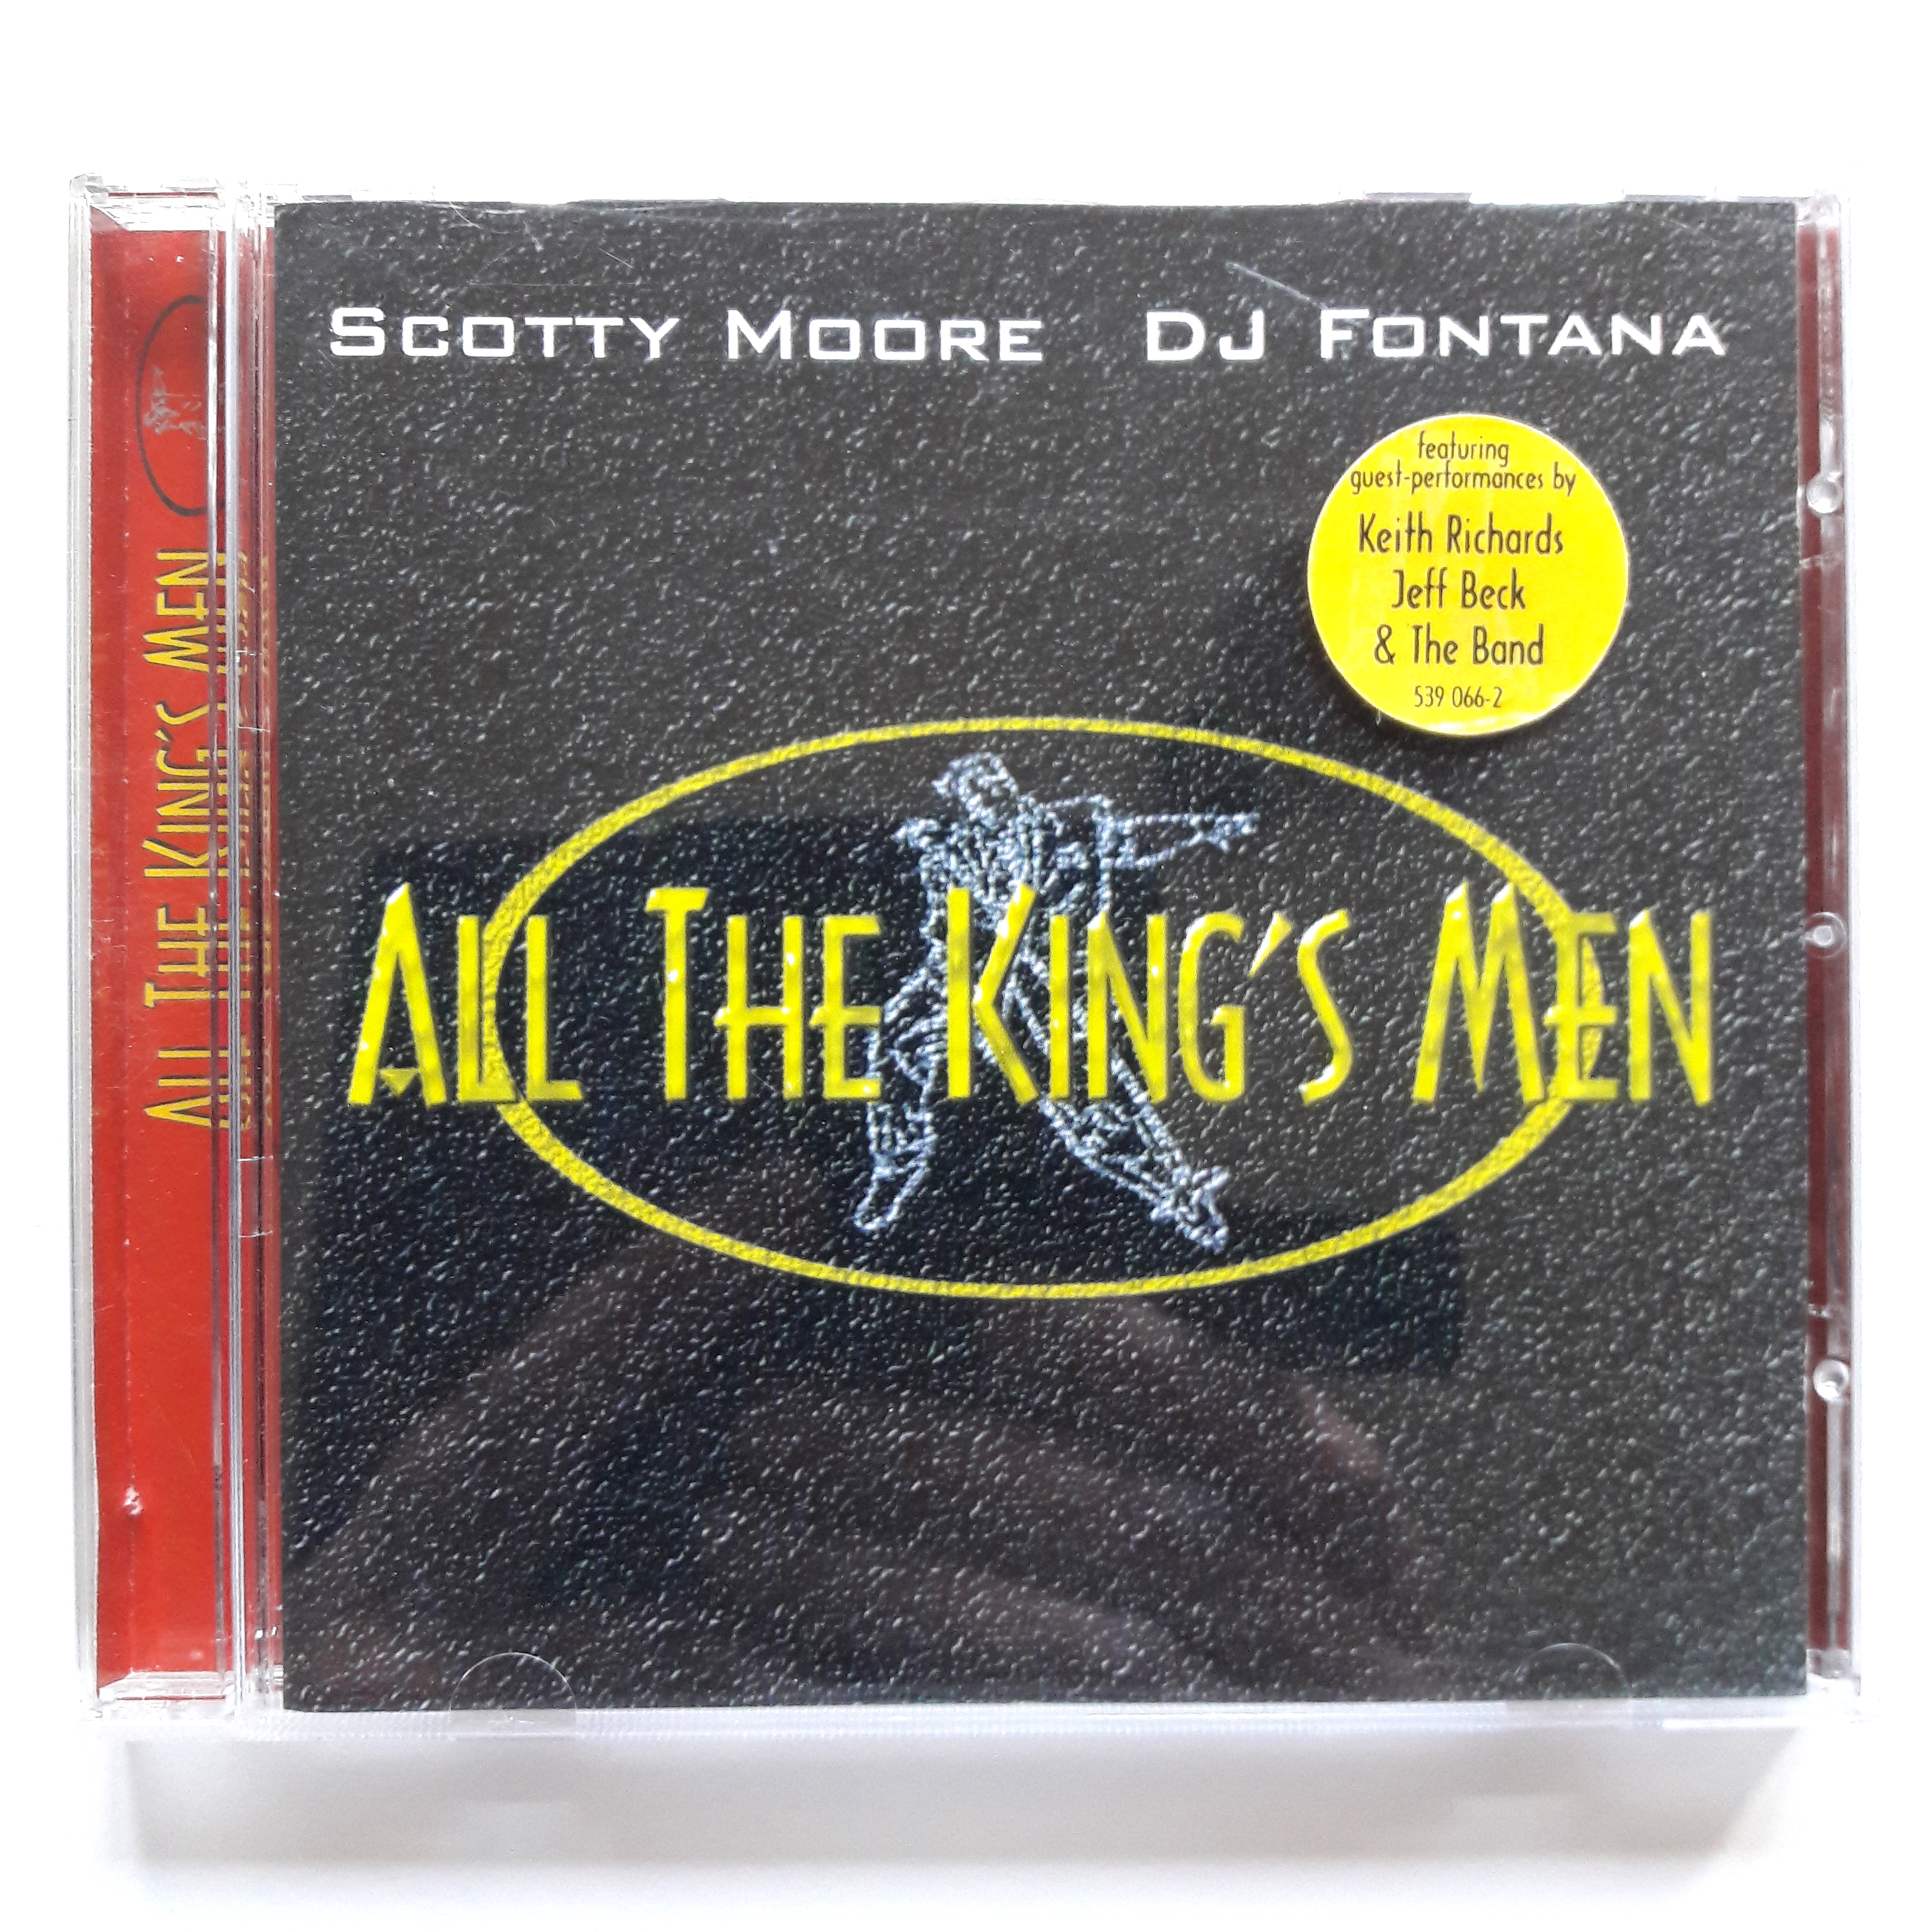 All The King's Men - Various Artists